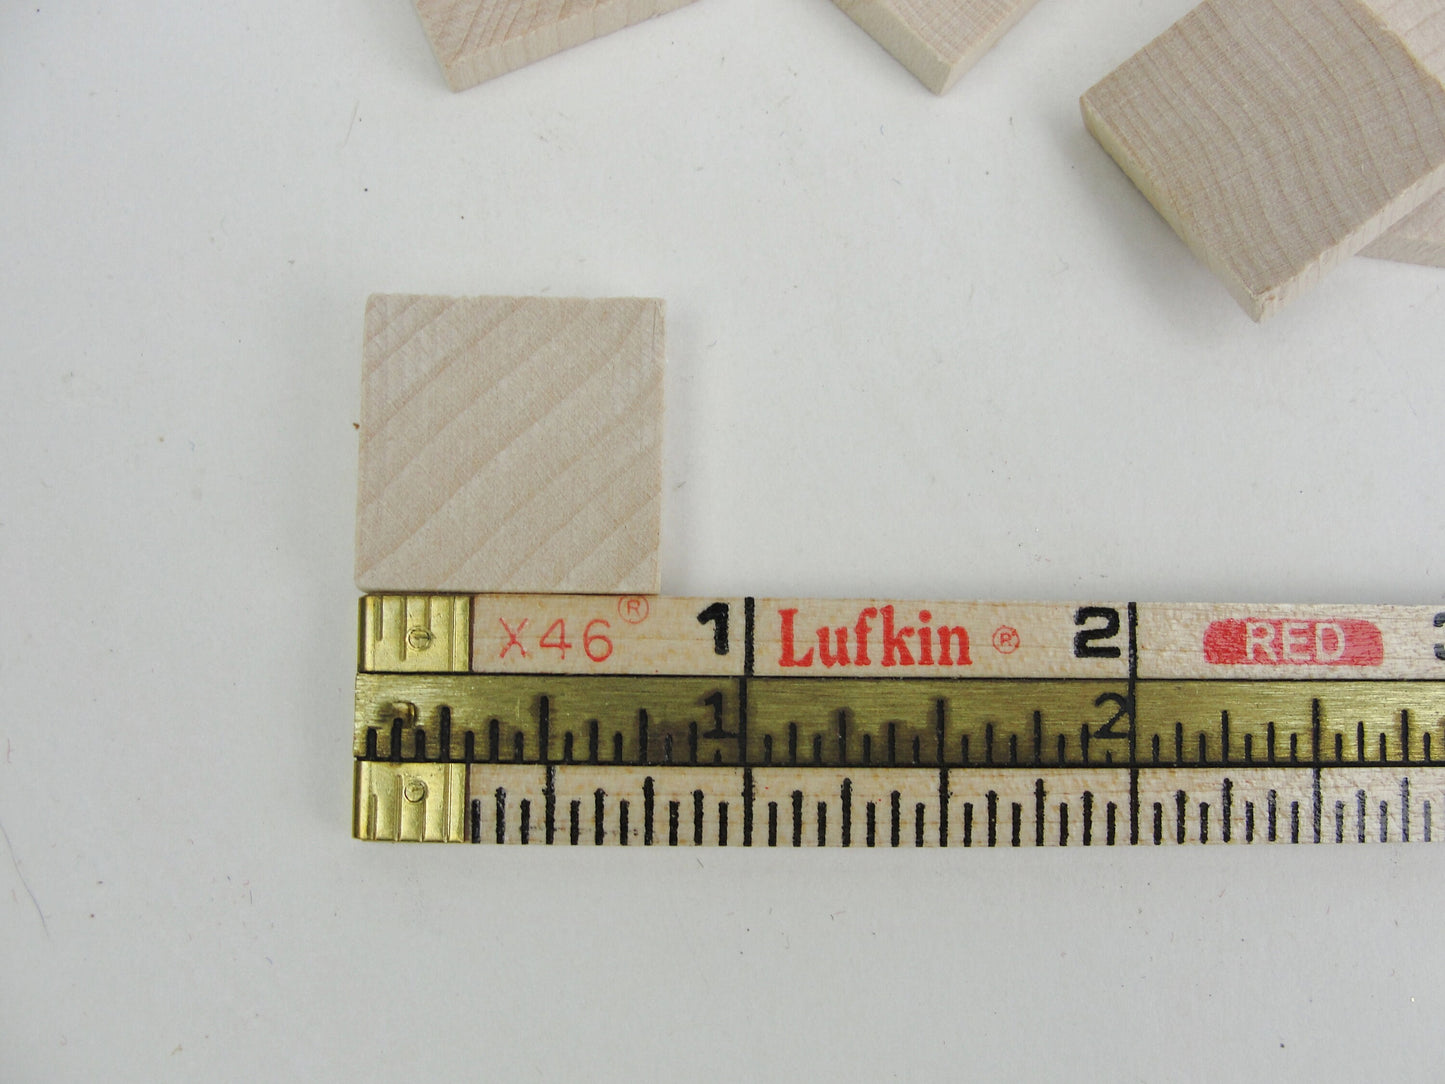 wooden square 3/4", .75 inch square tile 3/16" thick set of 12